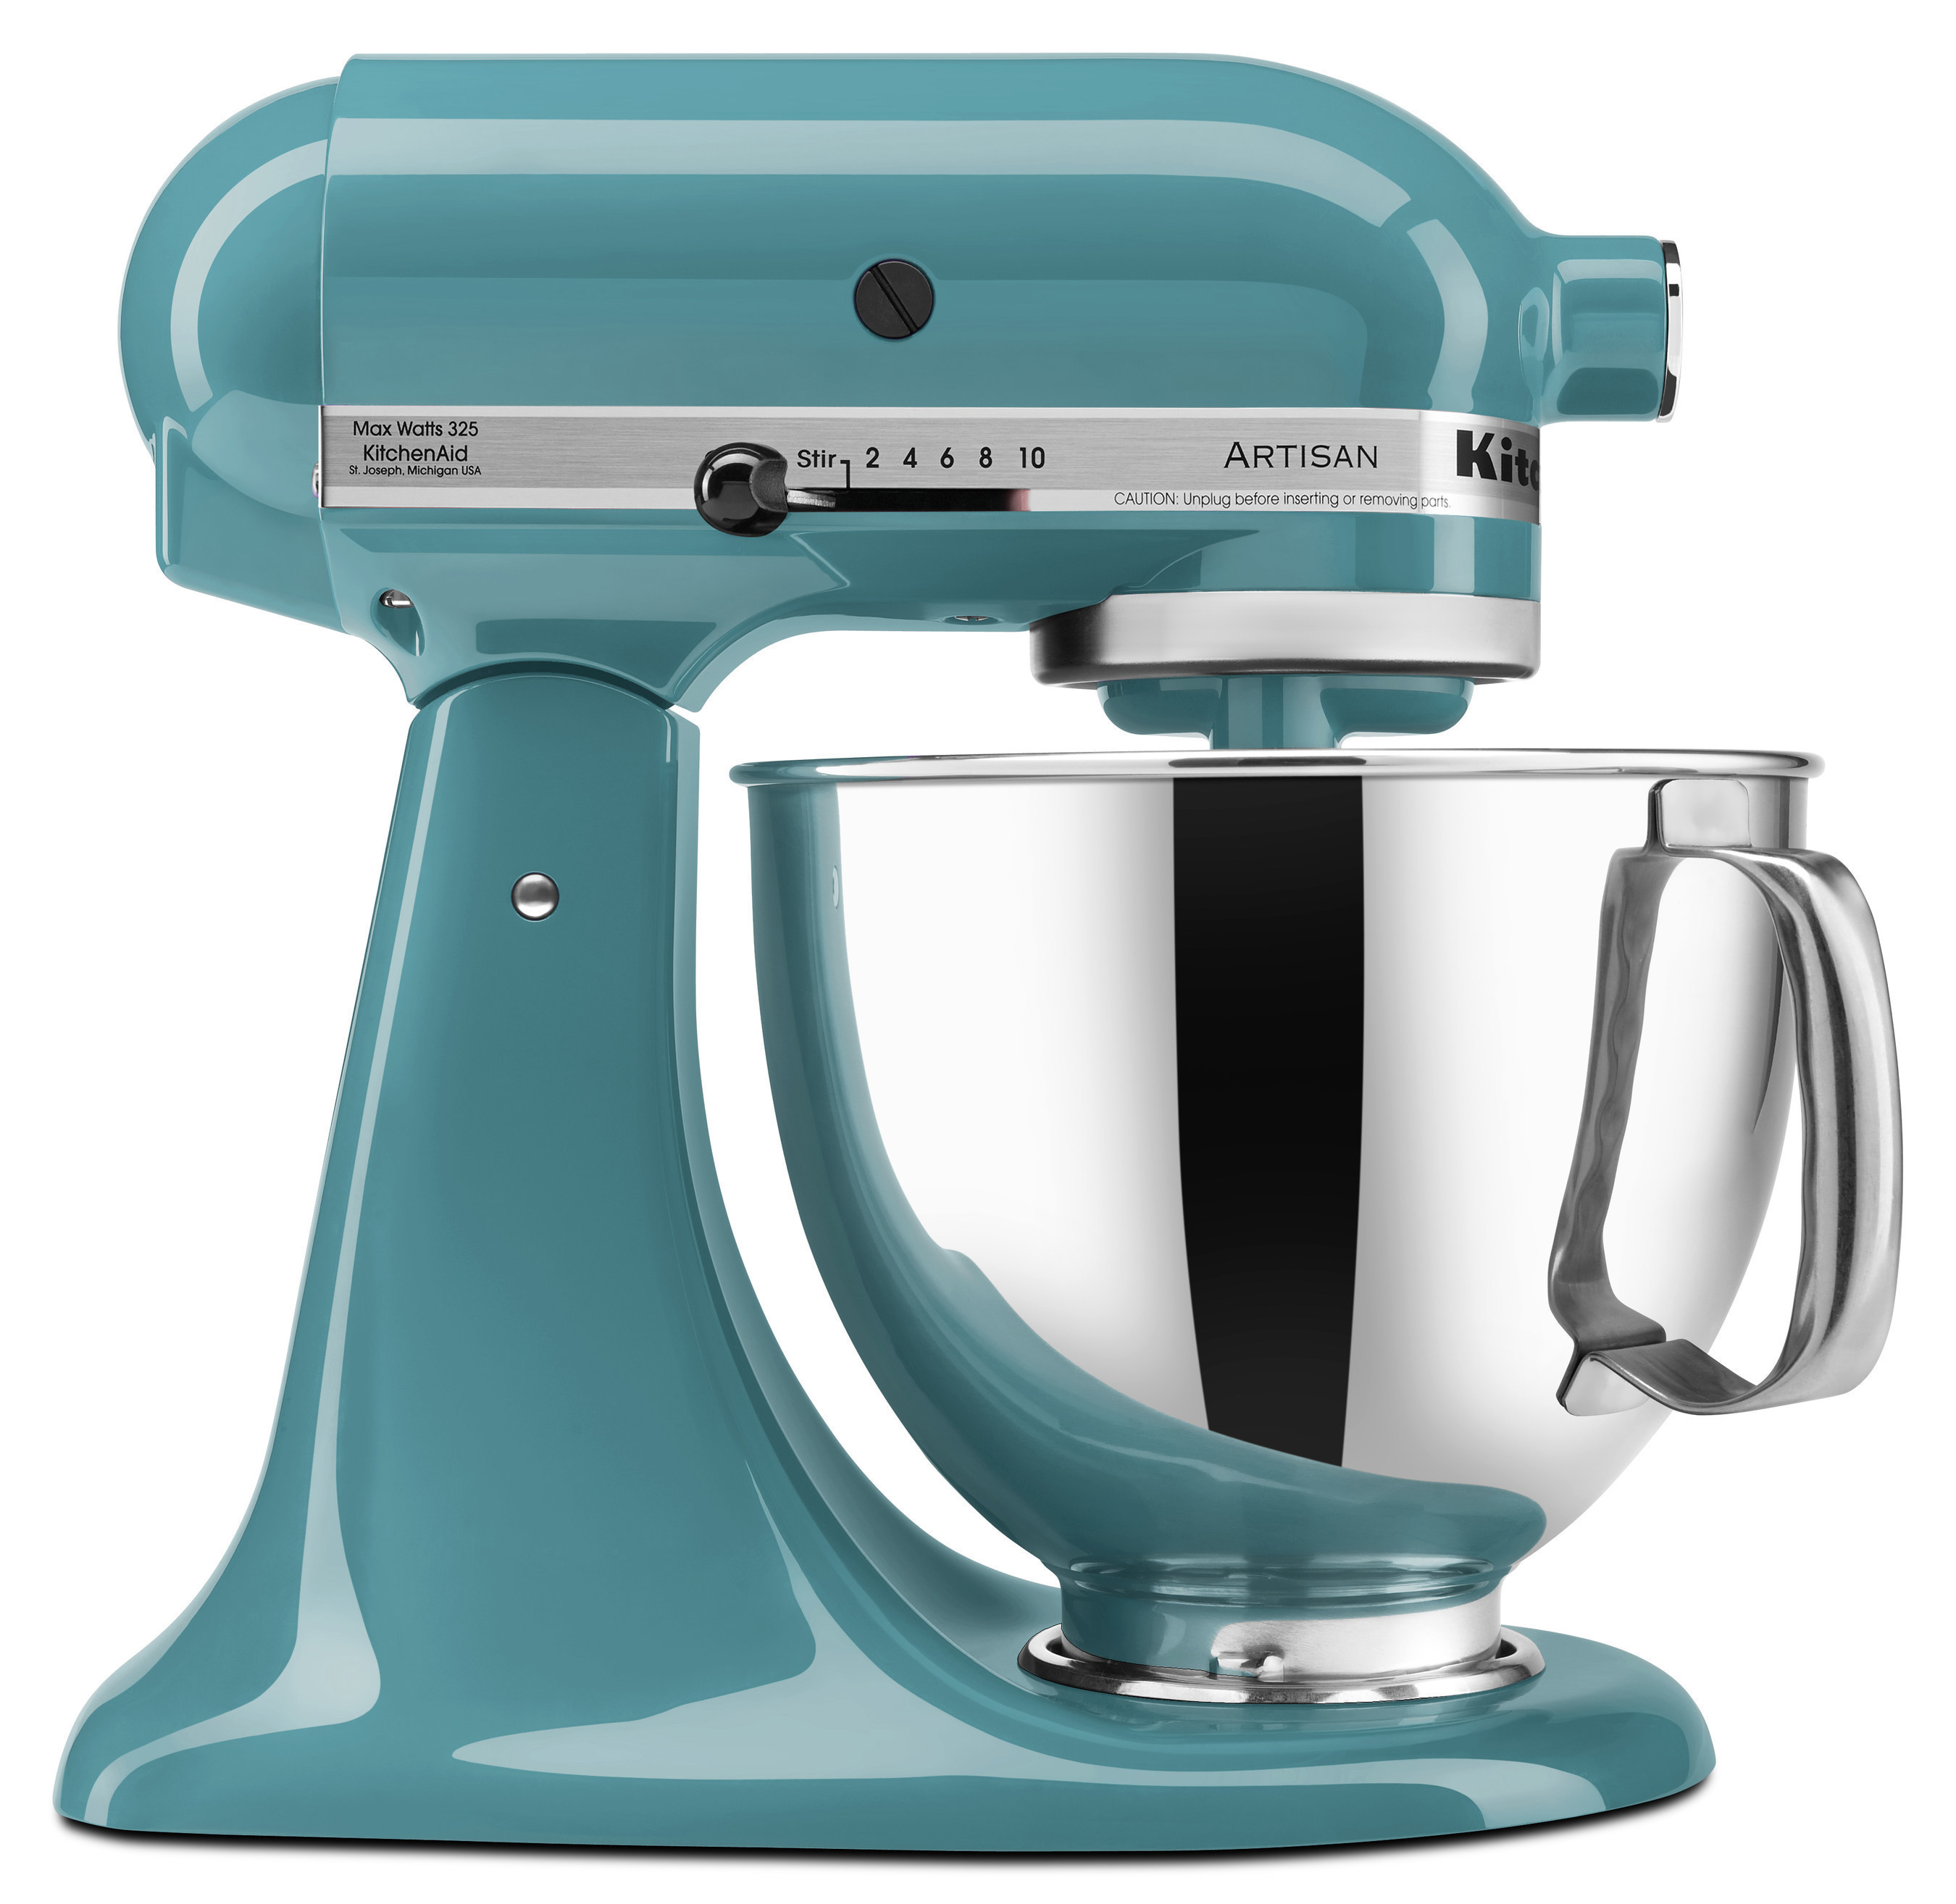 Is this a good blender for $10? : r/Kitchenaid